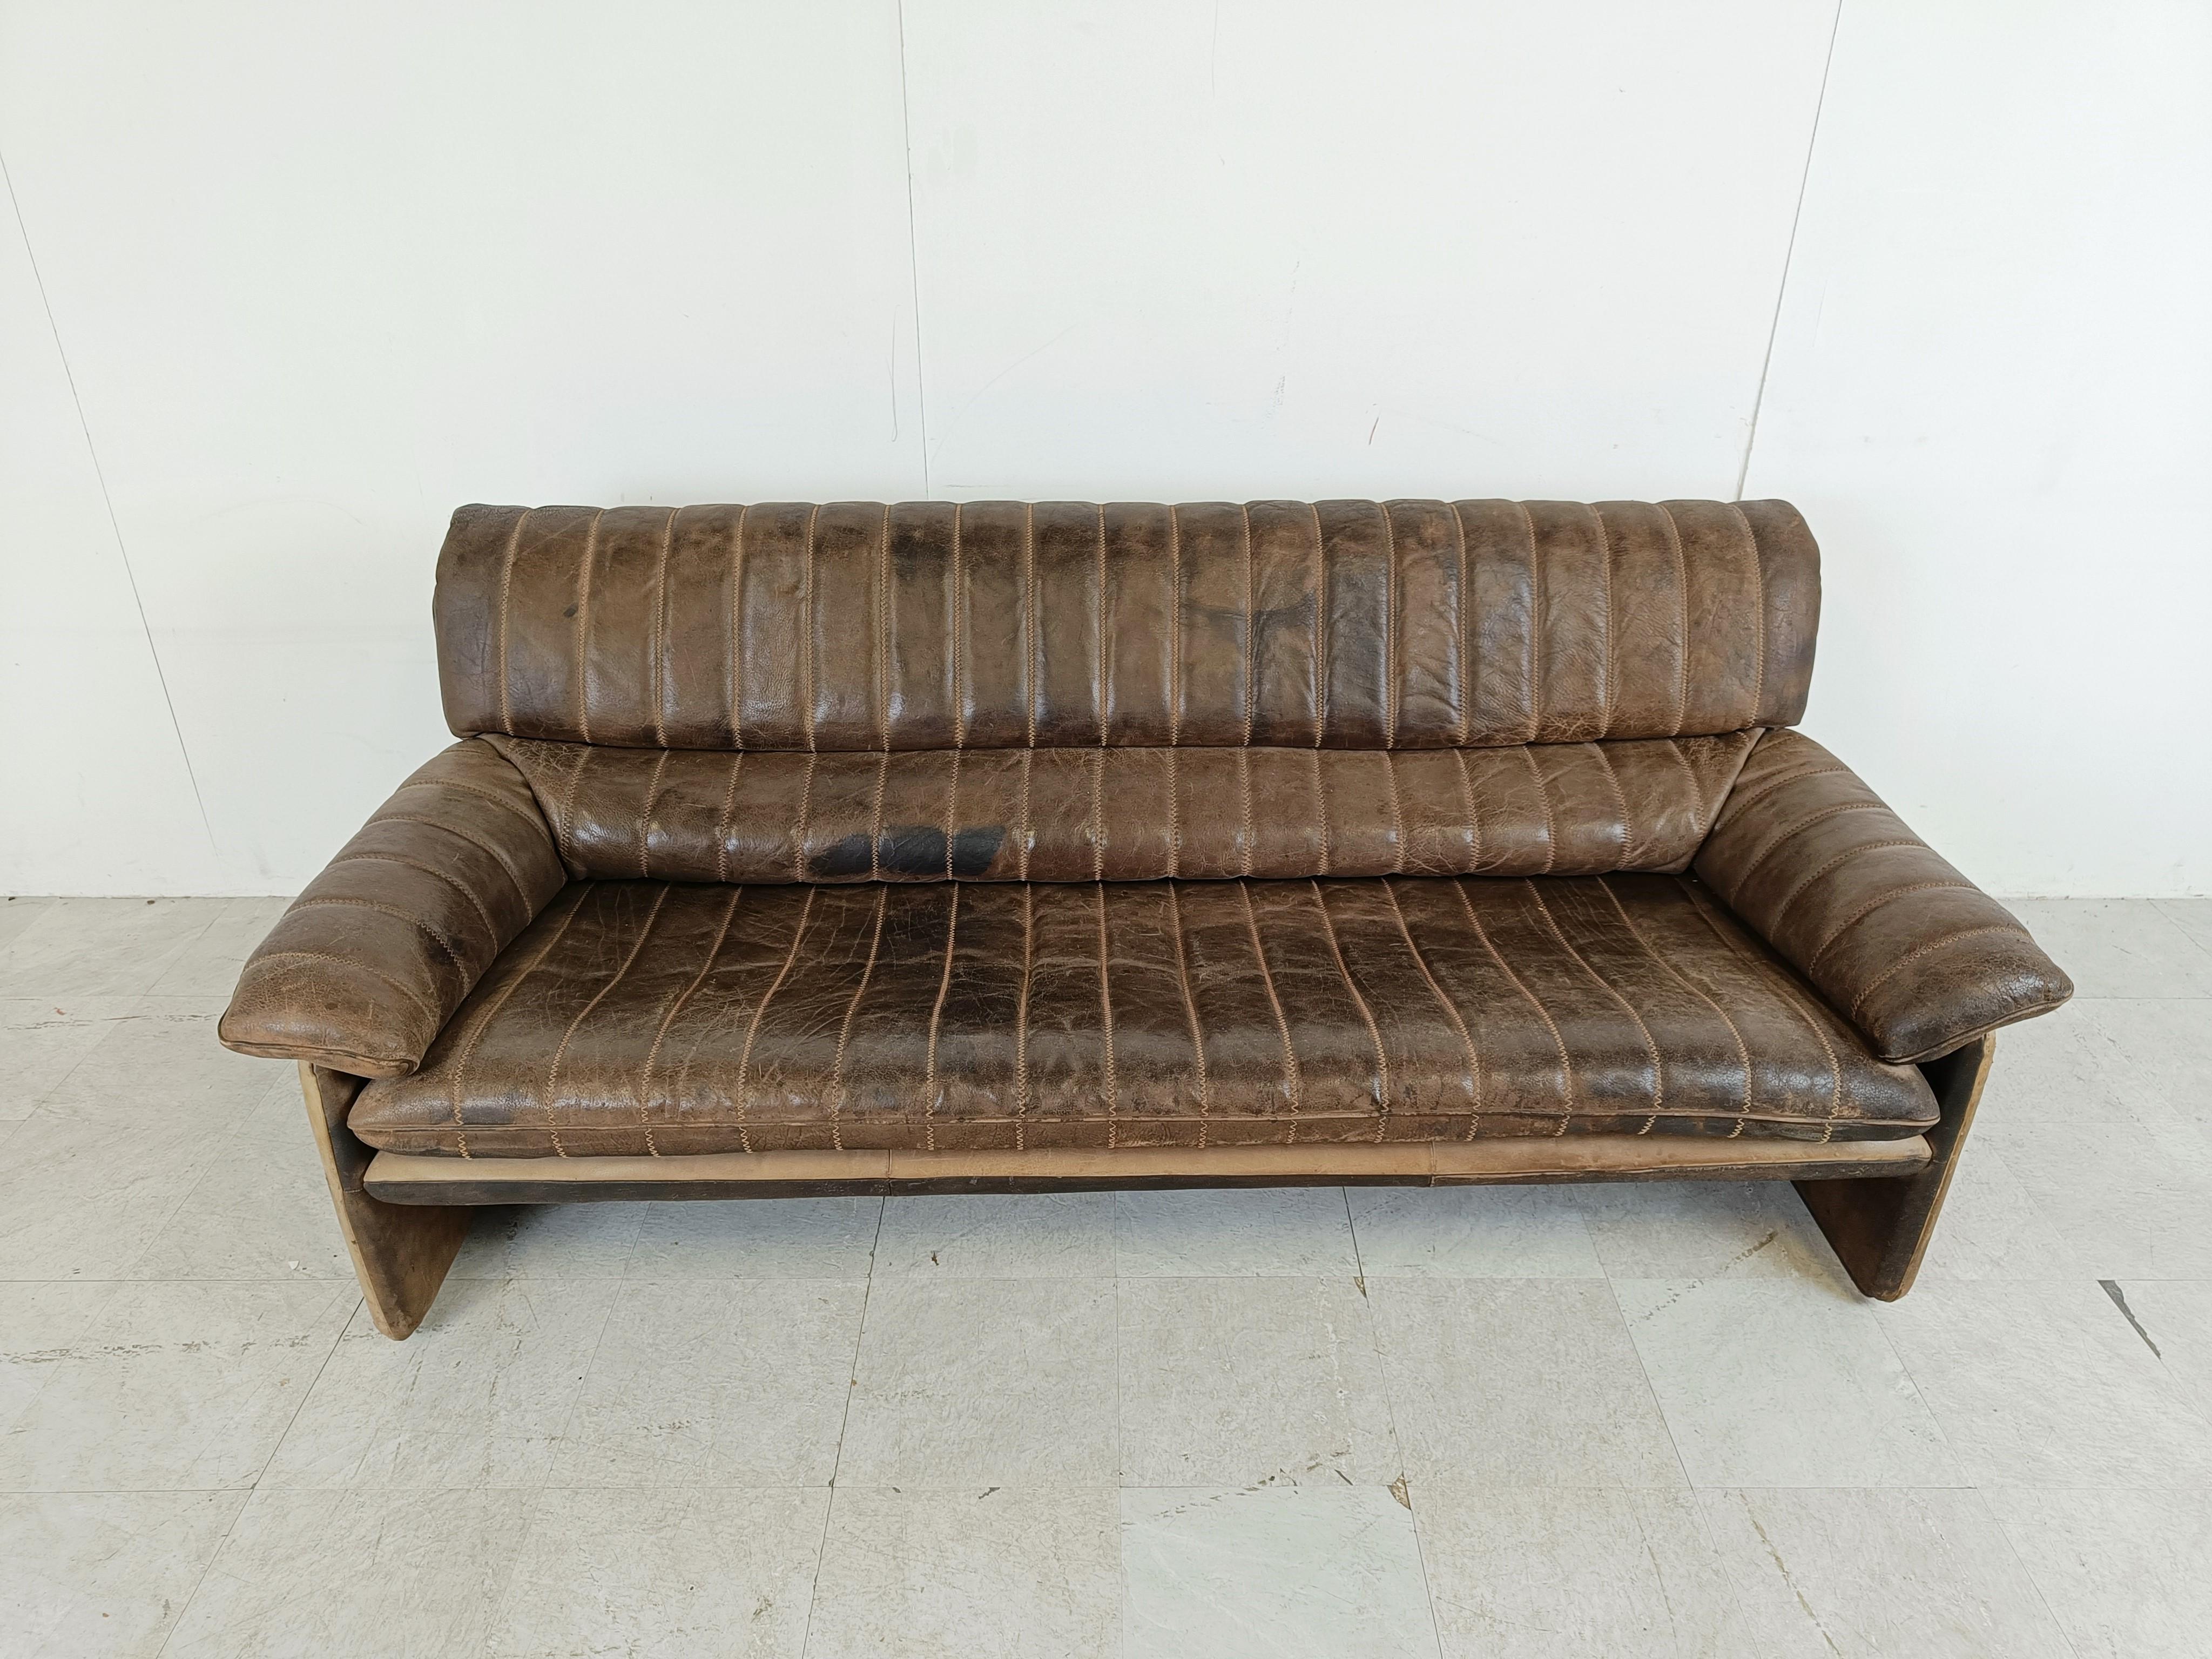 Beautiful dark brown leather sofa model DS86 designed and produced by De Sede.

Good condition with good looking patina. 

Very comfortable. 

1970s - Switzerland

Dimensions:

Height: 80cm/31.49